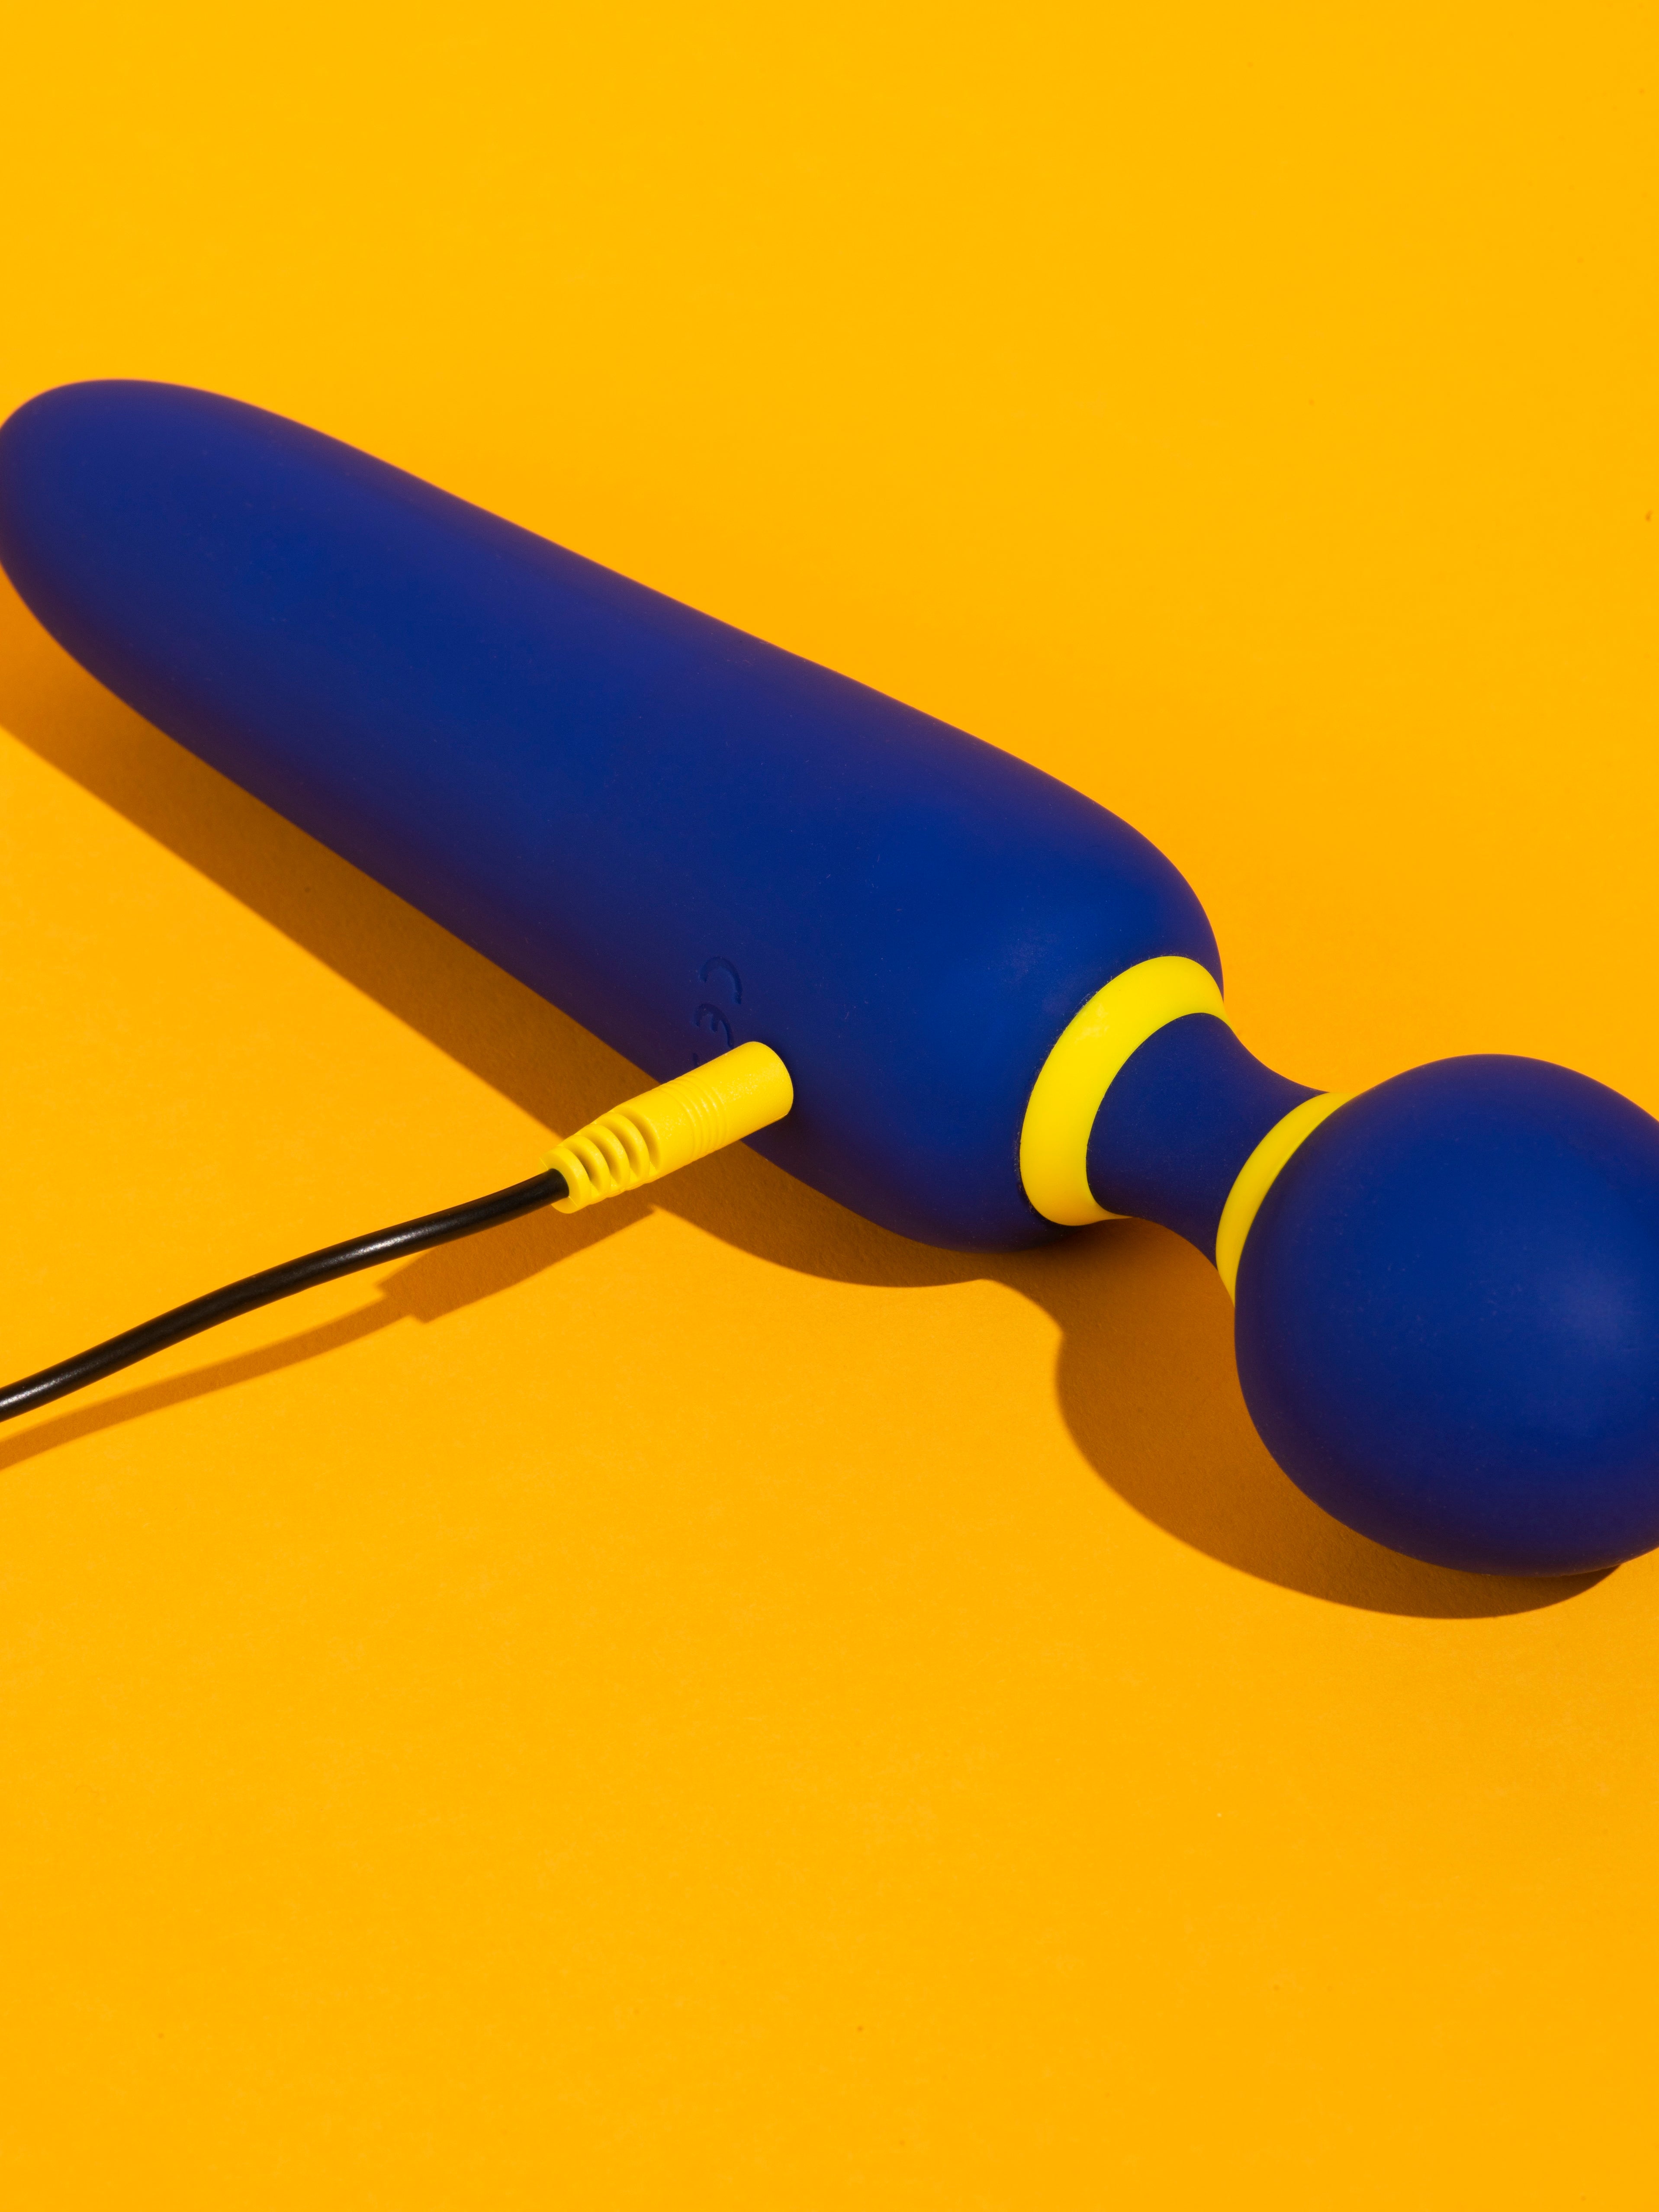 Romp Flip wand on yellow background, plugged in for charging